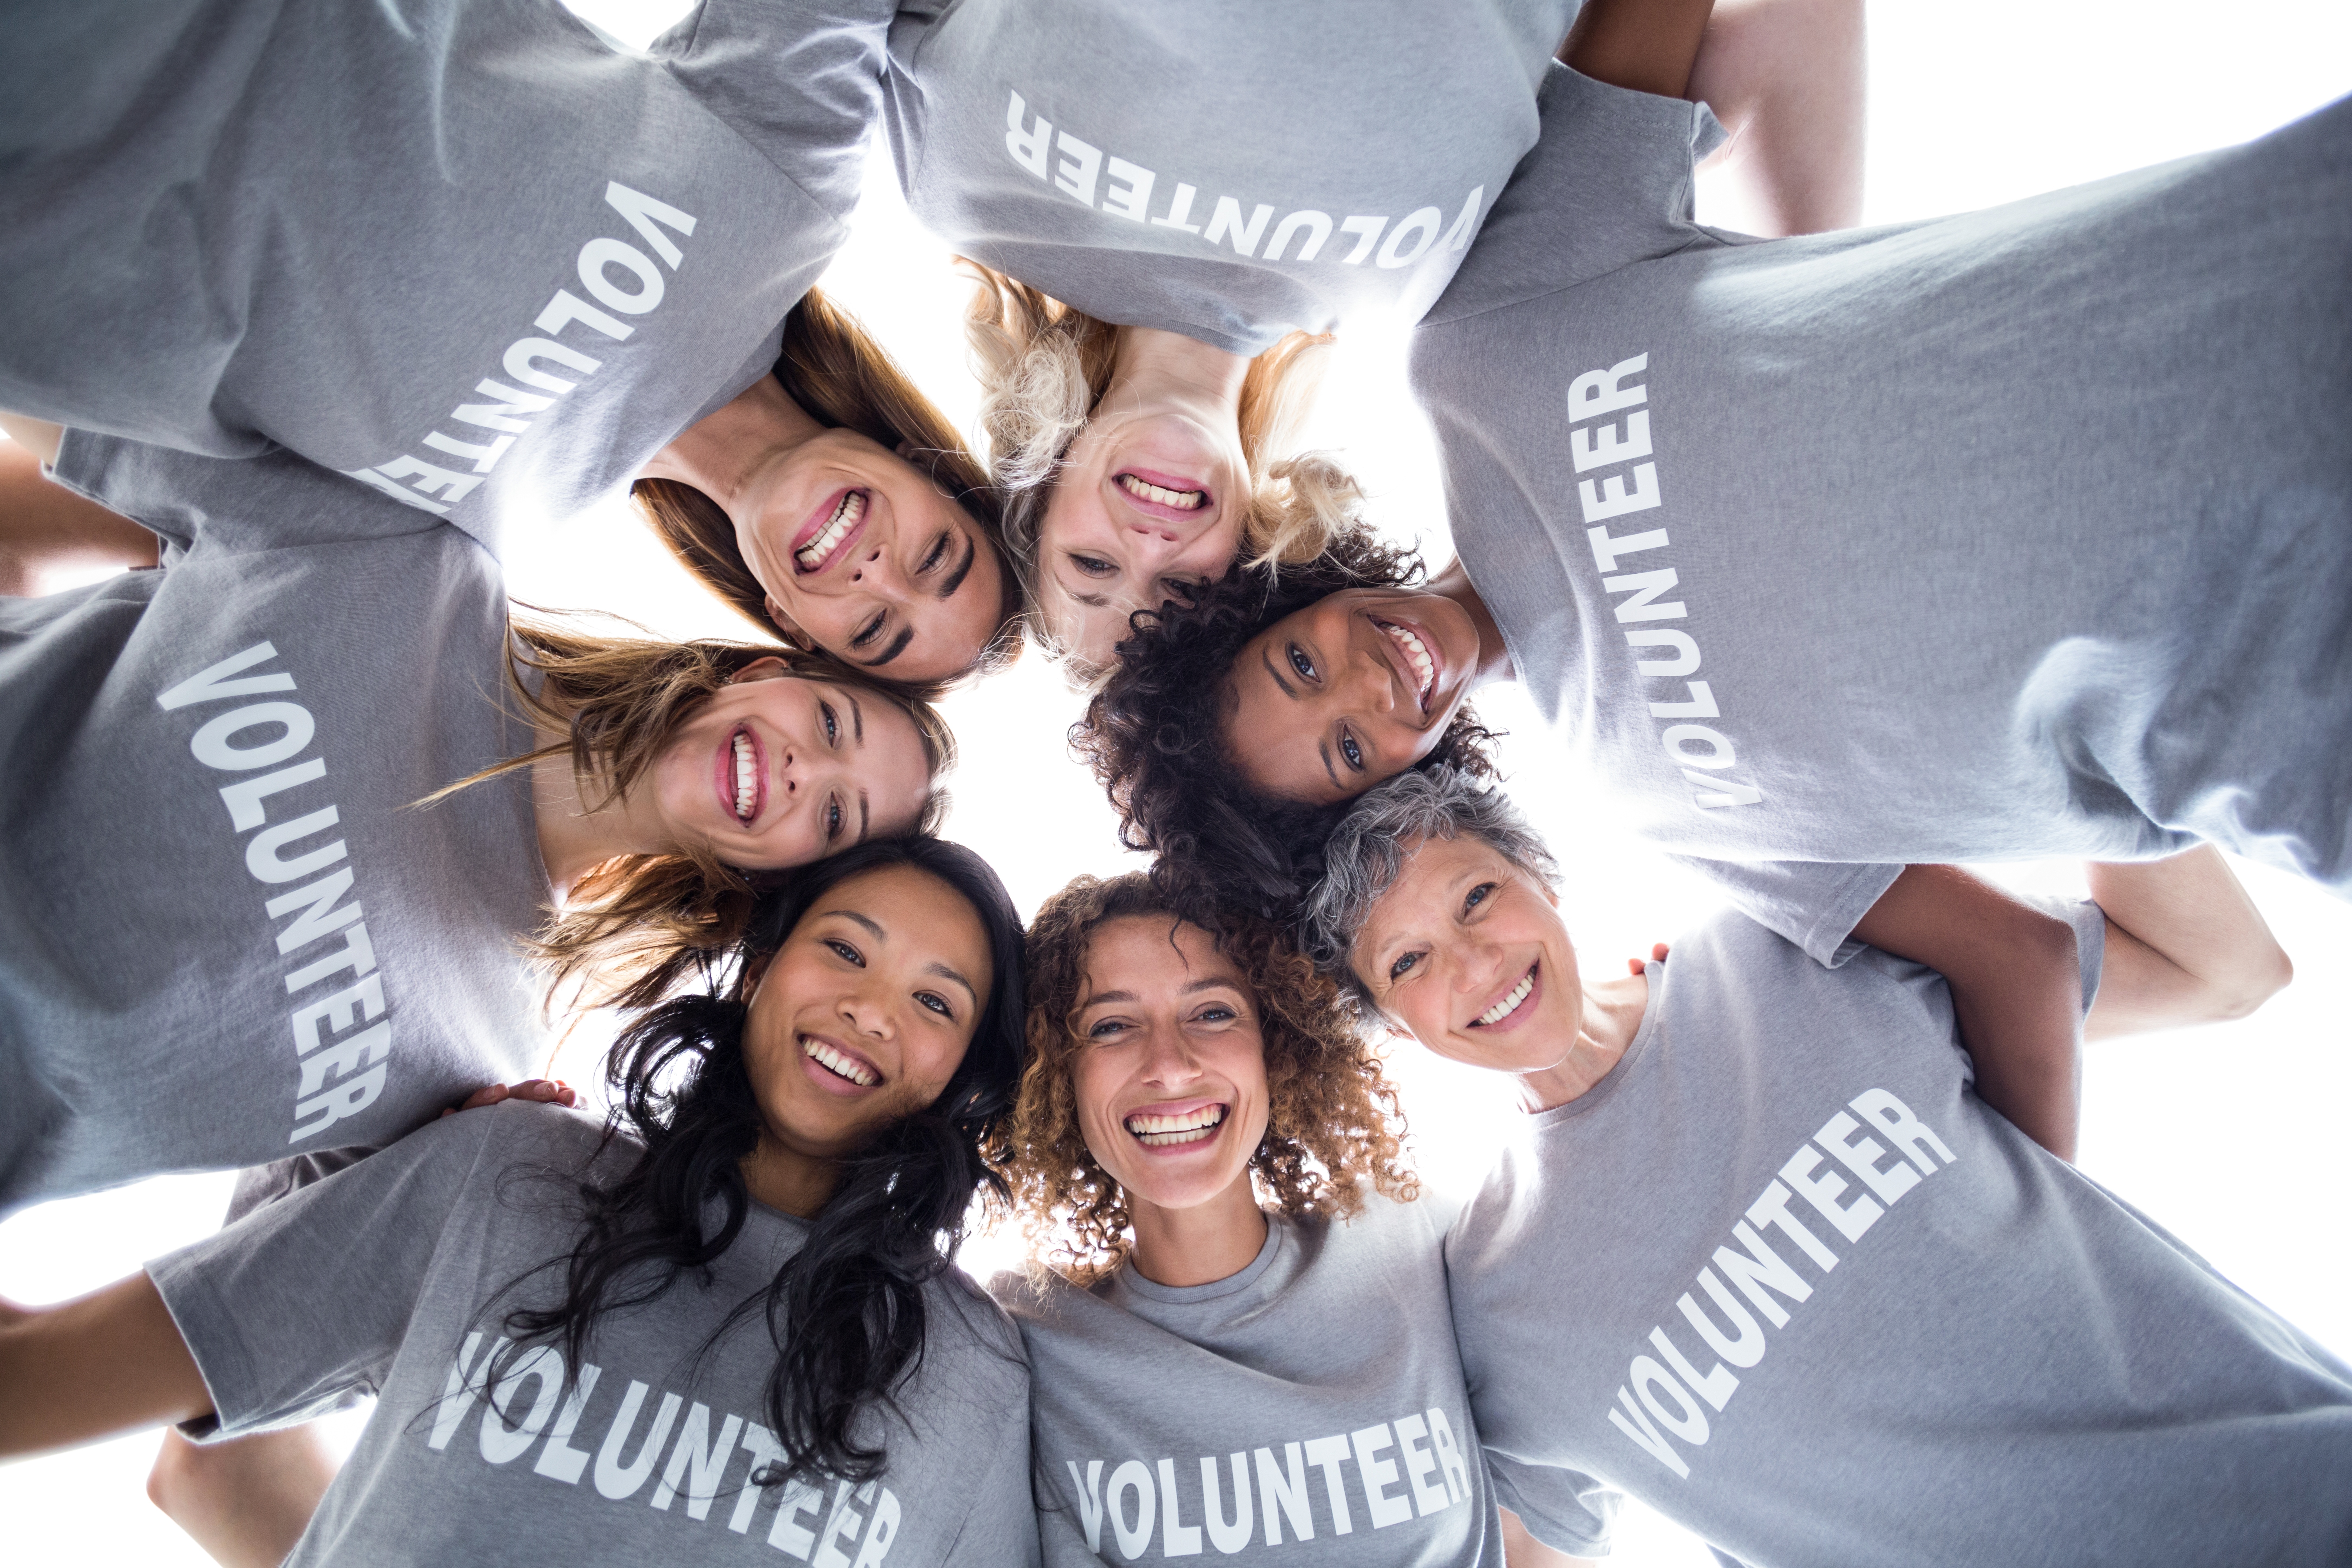 15 Volunteer Recruitment Ideas for Year-Round Support